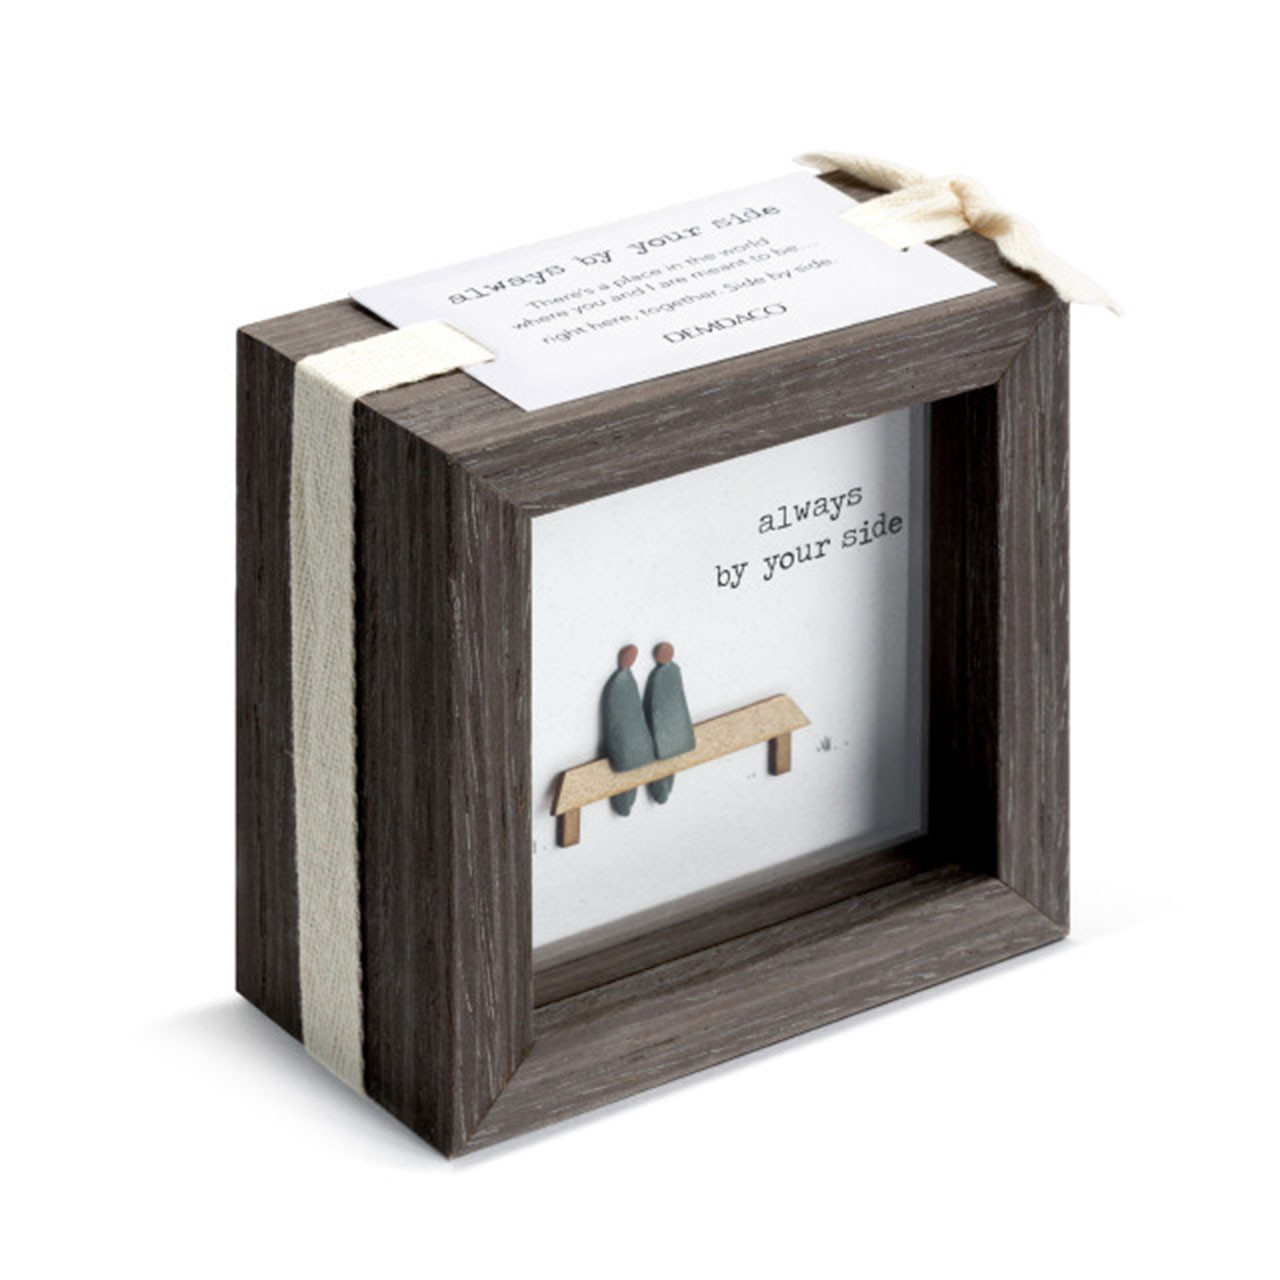 Packaging for the Always By Your Side Mini Plaque